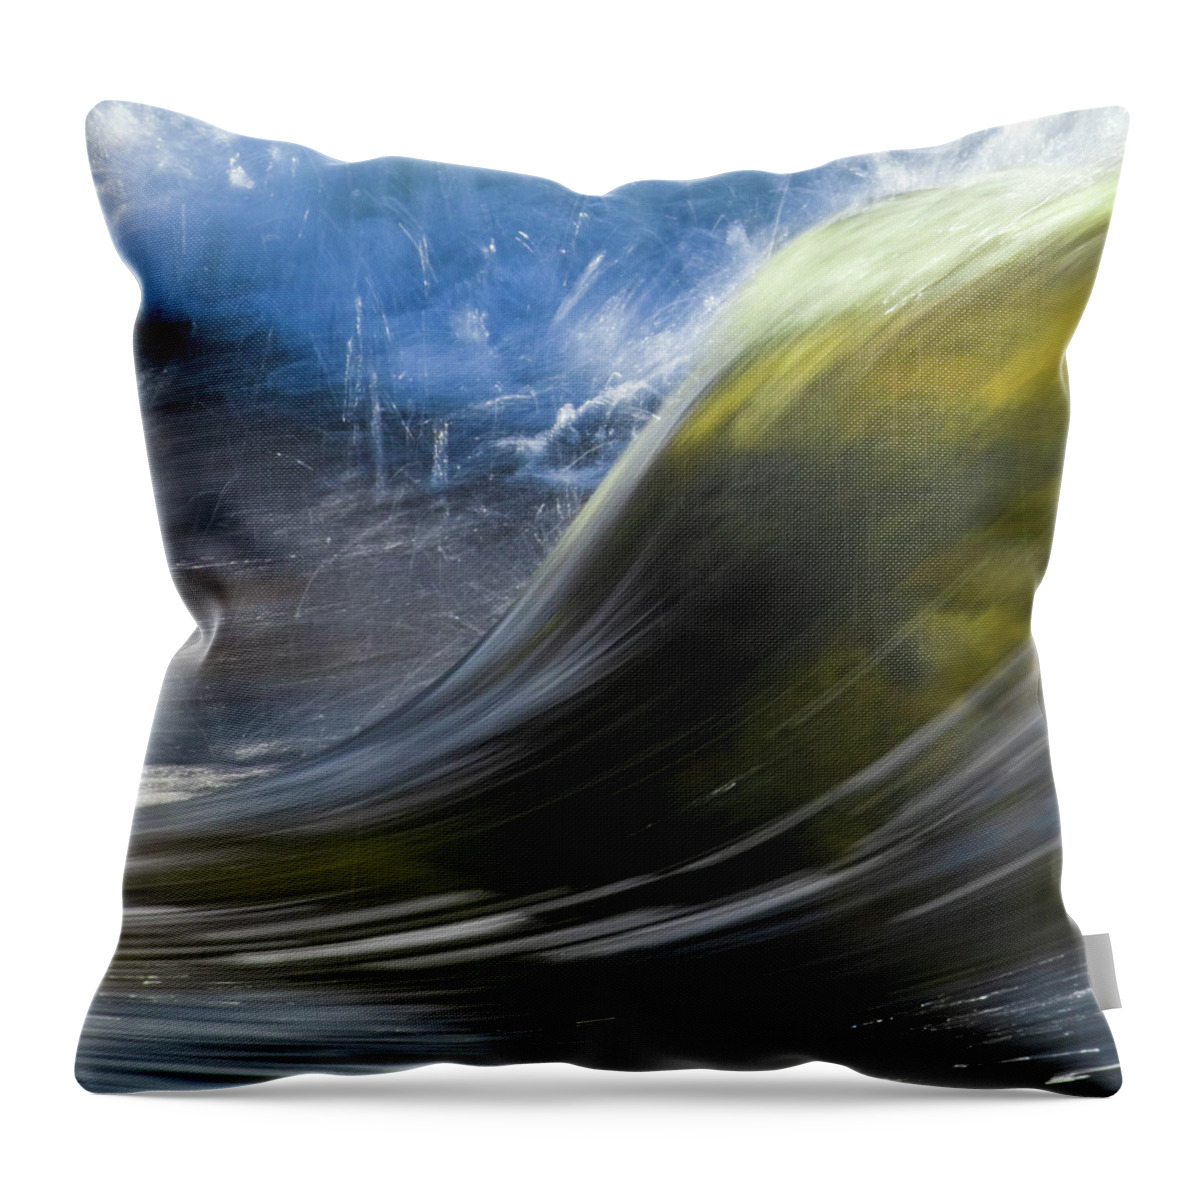 Heiko Throw Pillow featuring the photograph River Wave by Heiko Koehrer-Wagner